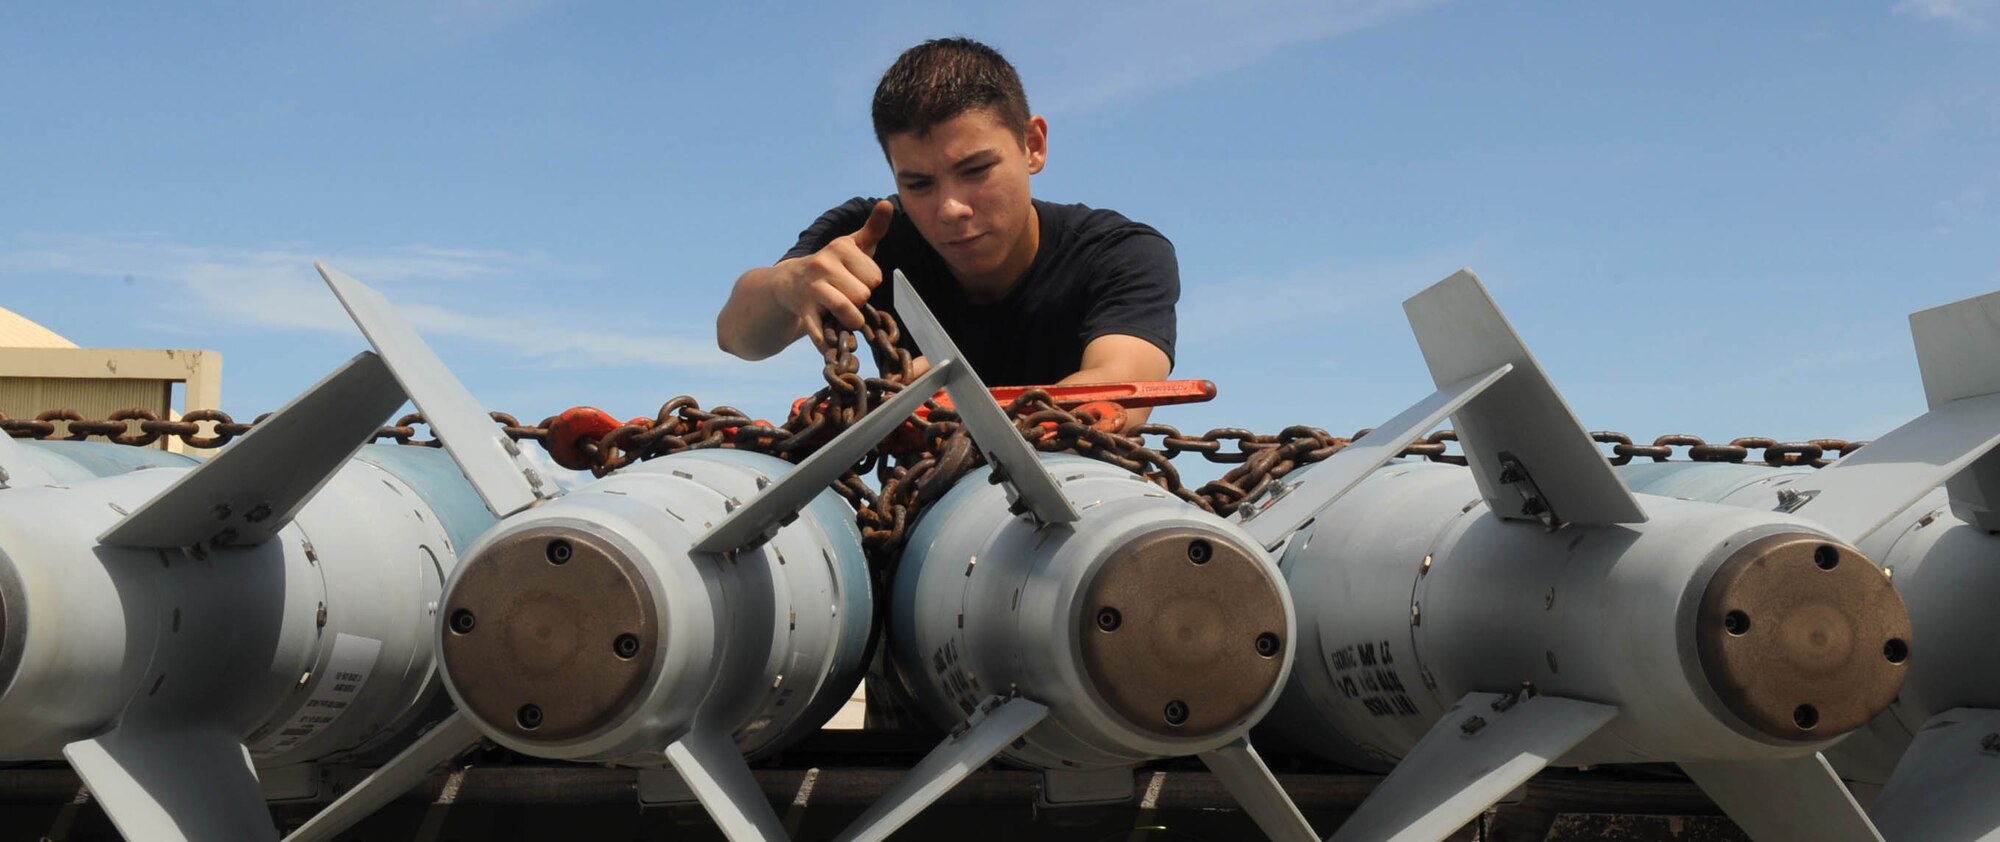 ANDERSEN AIR FORCE BASE, Guam - Senior Airman Louie E. Gaitan, 36th Expeditionary Aircraft Maintenance Squadron B-2 weapons load team member, prepares munitions to be loaded on a B-2 Spirit.  The Highland Falls, N.Y., native is deployed here to Andersen Air Force Base, Guam, from Whiteman AFB, Mo.  The B-2 was flying as part of a training mission, Polar Lightning, from Andersen AFB to Elmendorf AFB, Alaska.